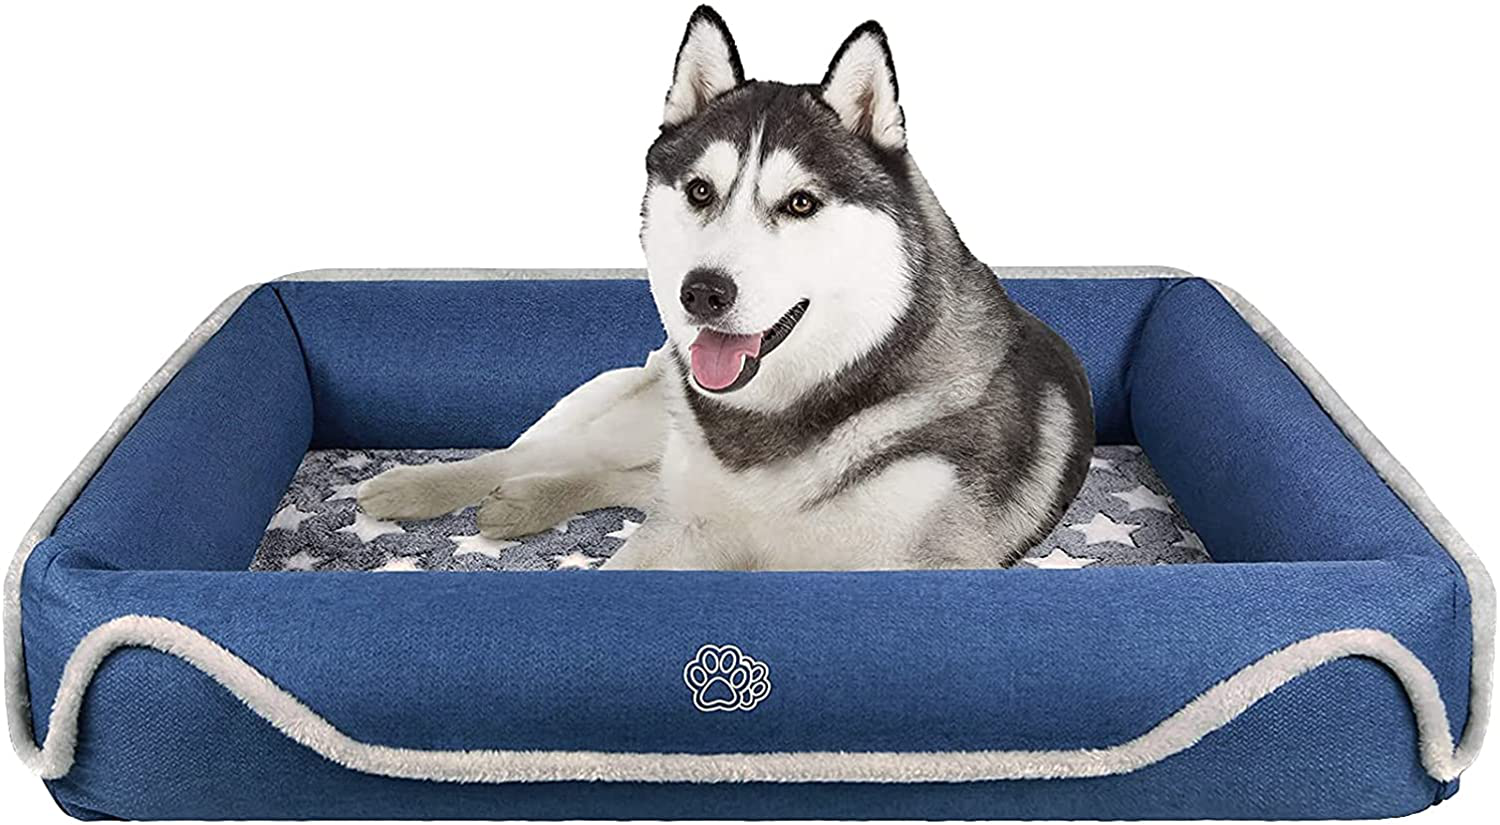 EMPSIGN Bolster 2-In-1 Dog Bed, Pet Bed with Reversible Inner Pad (Warm & Cool), Washable Bed Water Repellent Removable Covers, Waterproof Non-Skid Bottom & High Density Foam, Blue & Grey, Star Print Animals & Pet Supplies > Pet Supplies > Dog Supplies > Dog Beds EMPSIGN L (38”x29”x8”)  